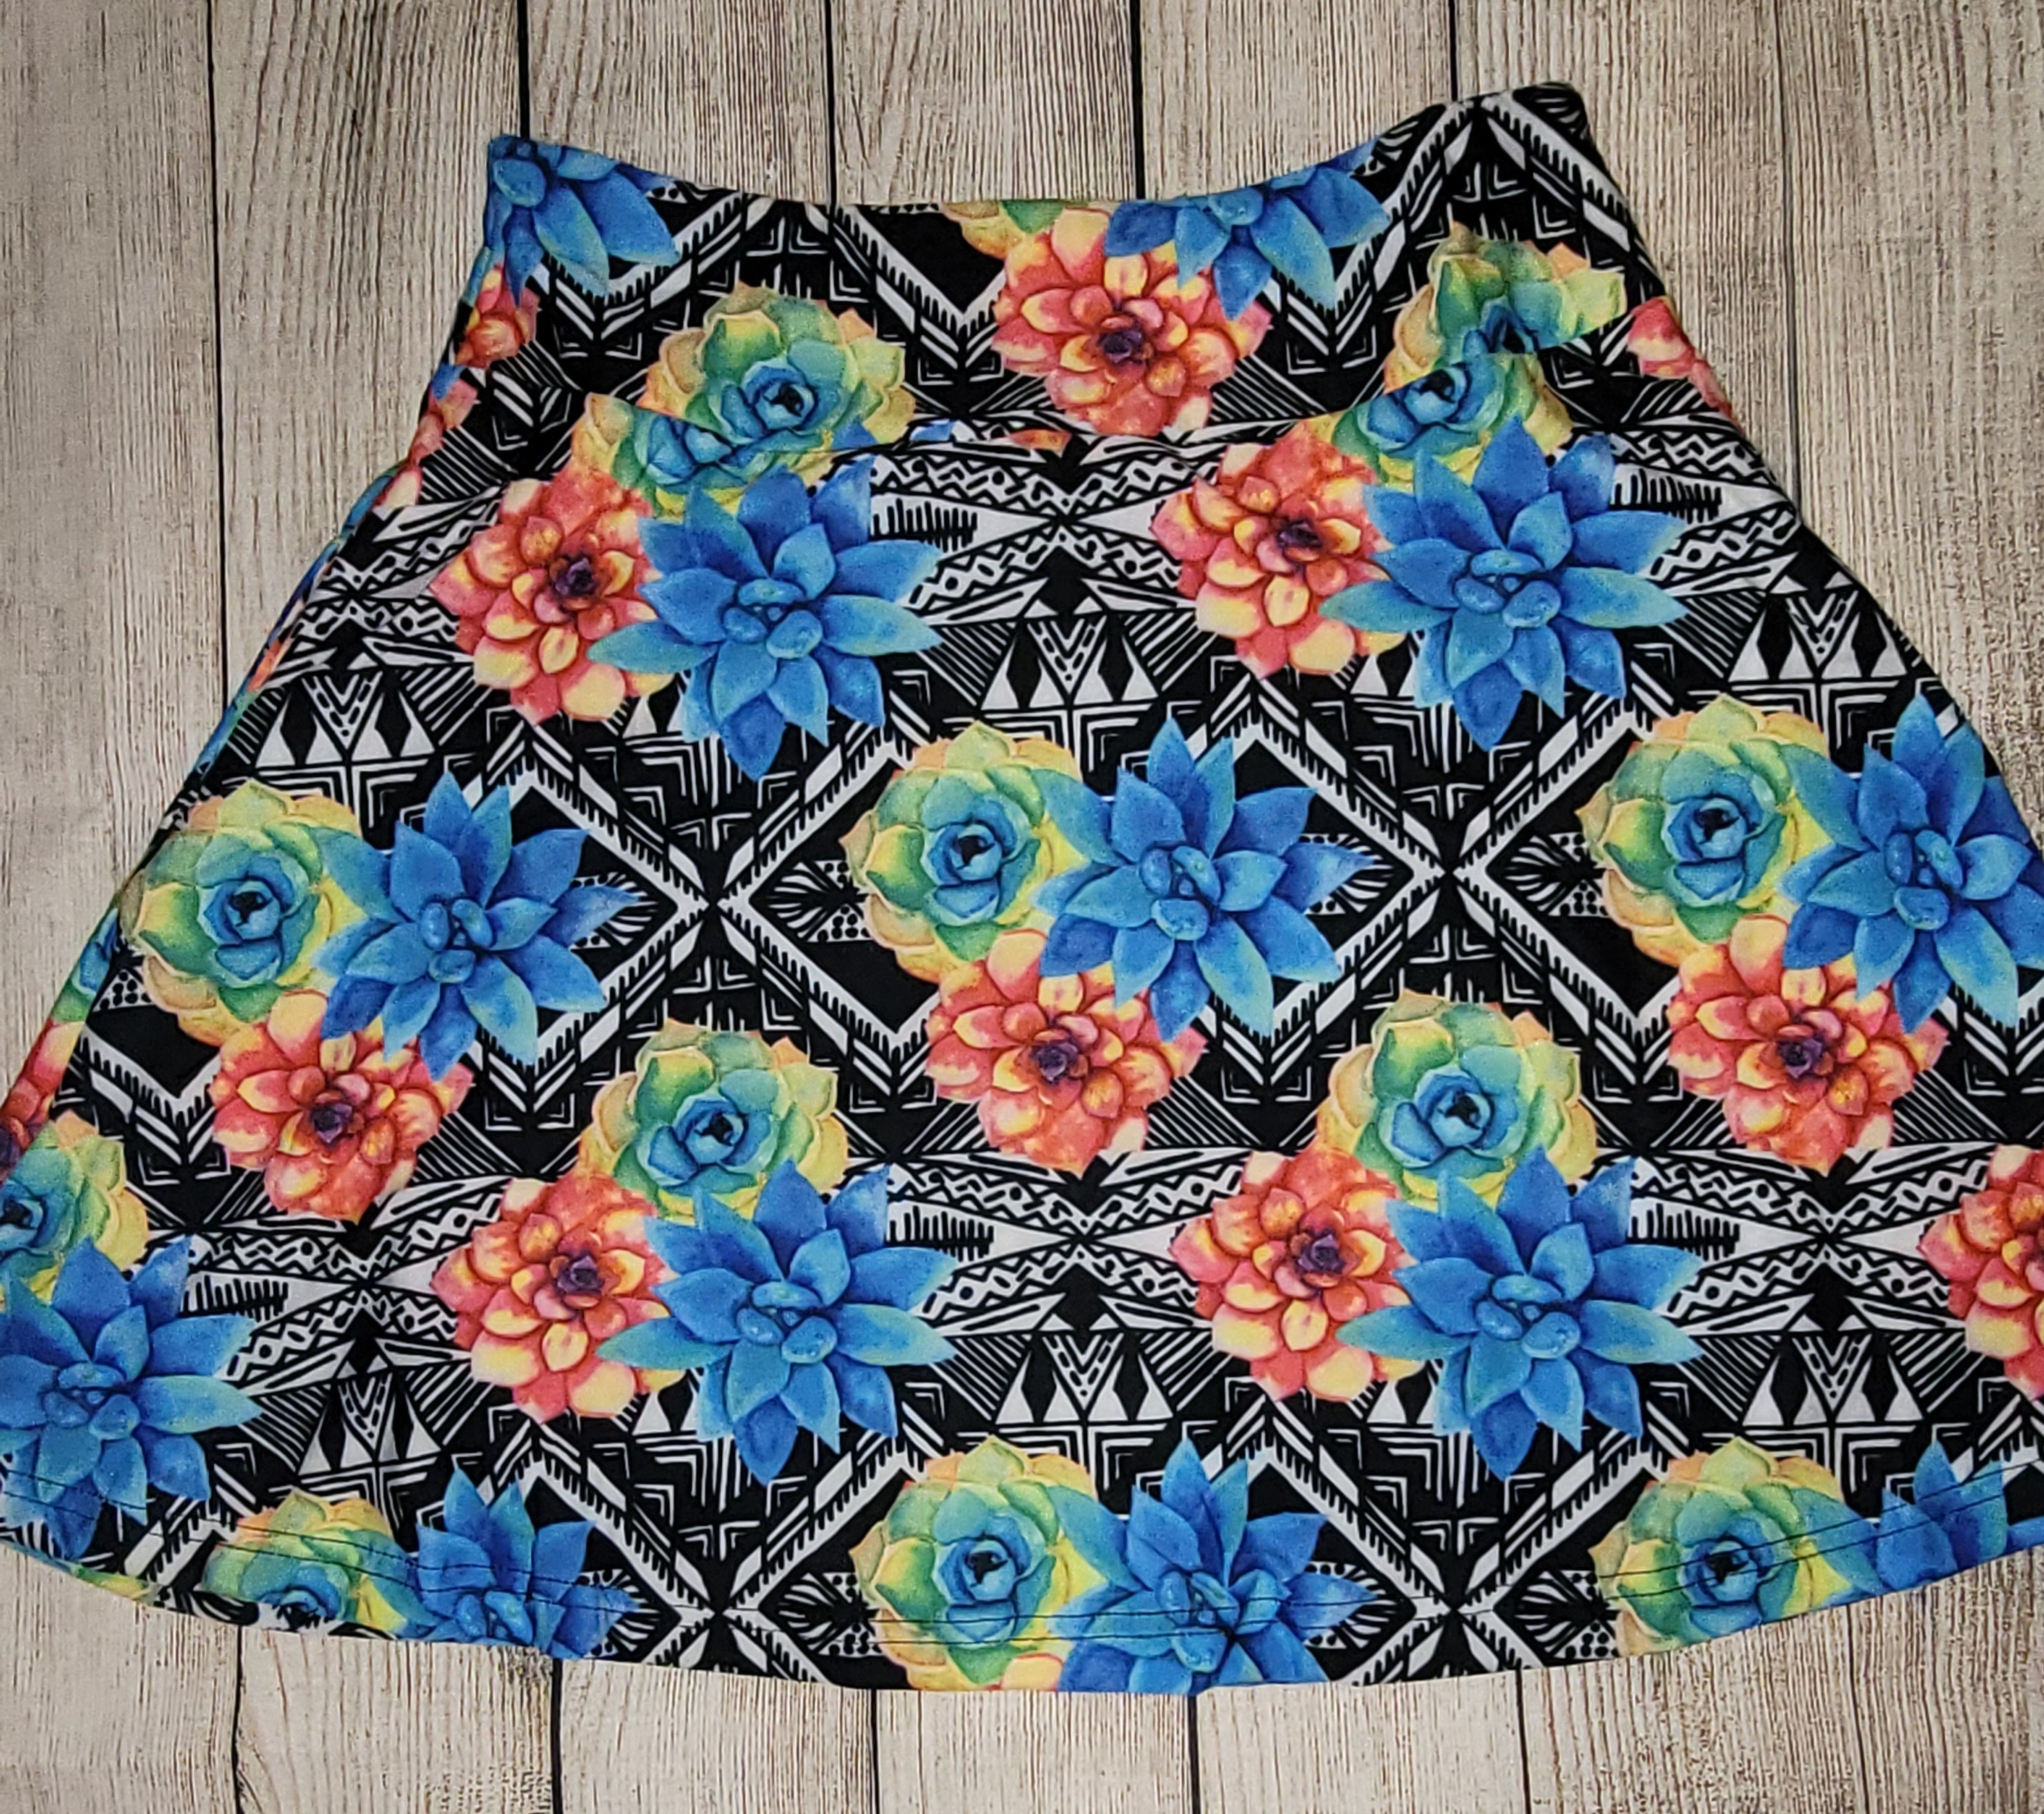 Exotic Flower skorts with pockets